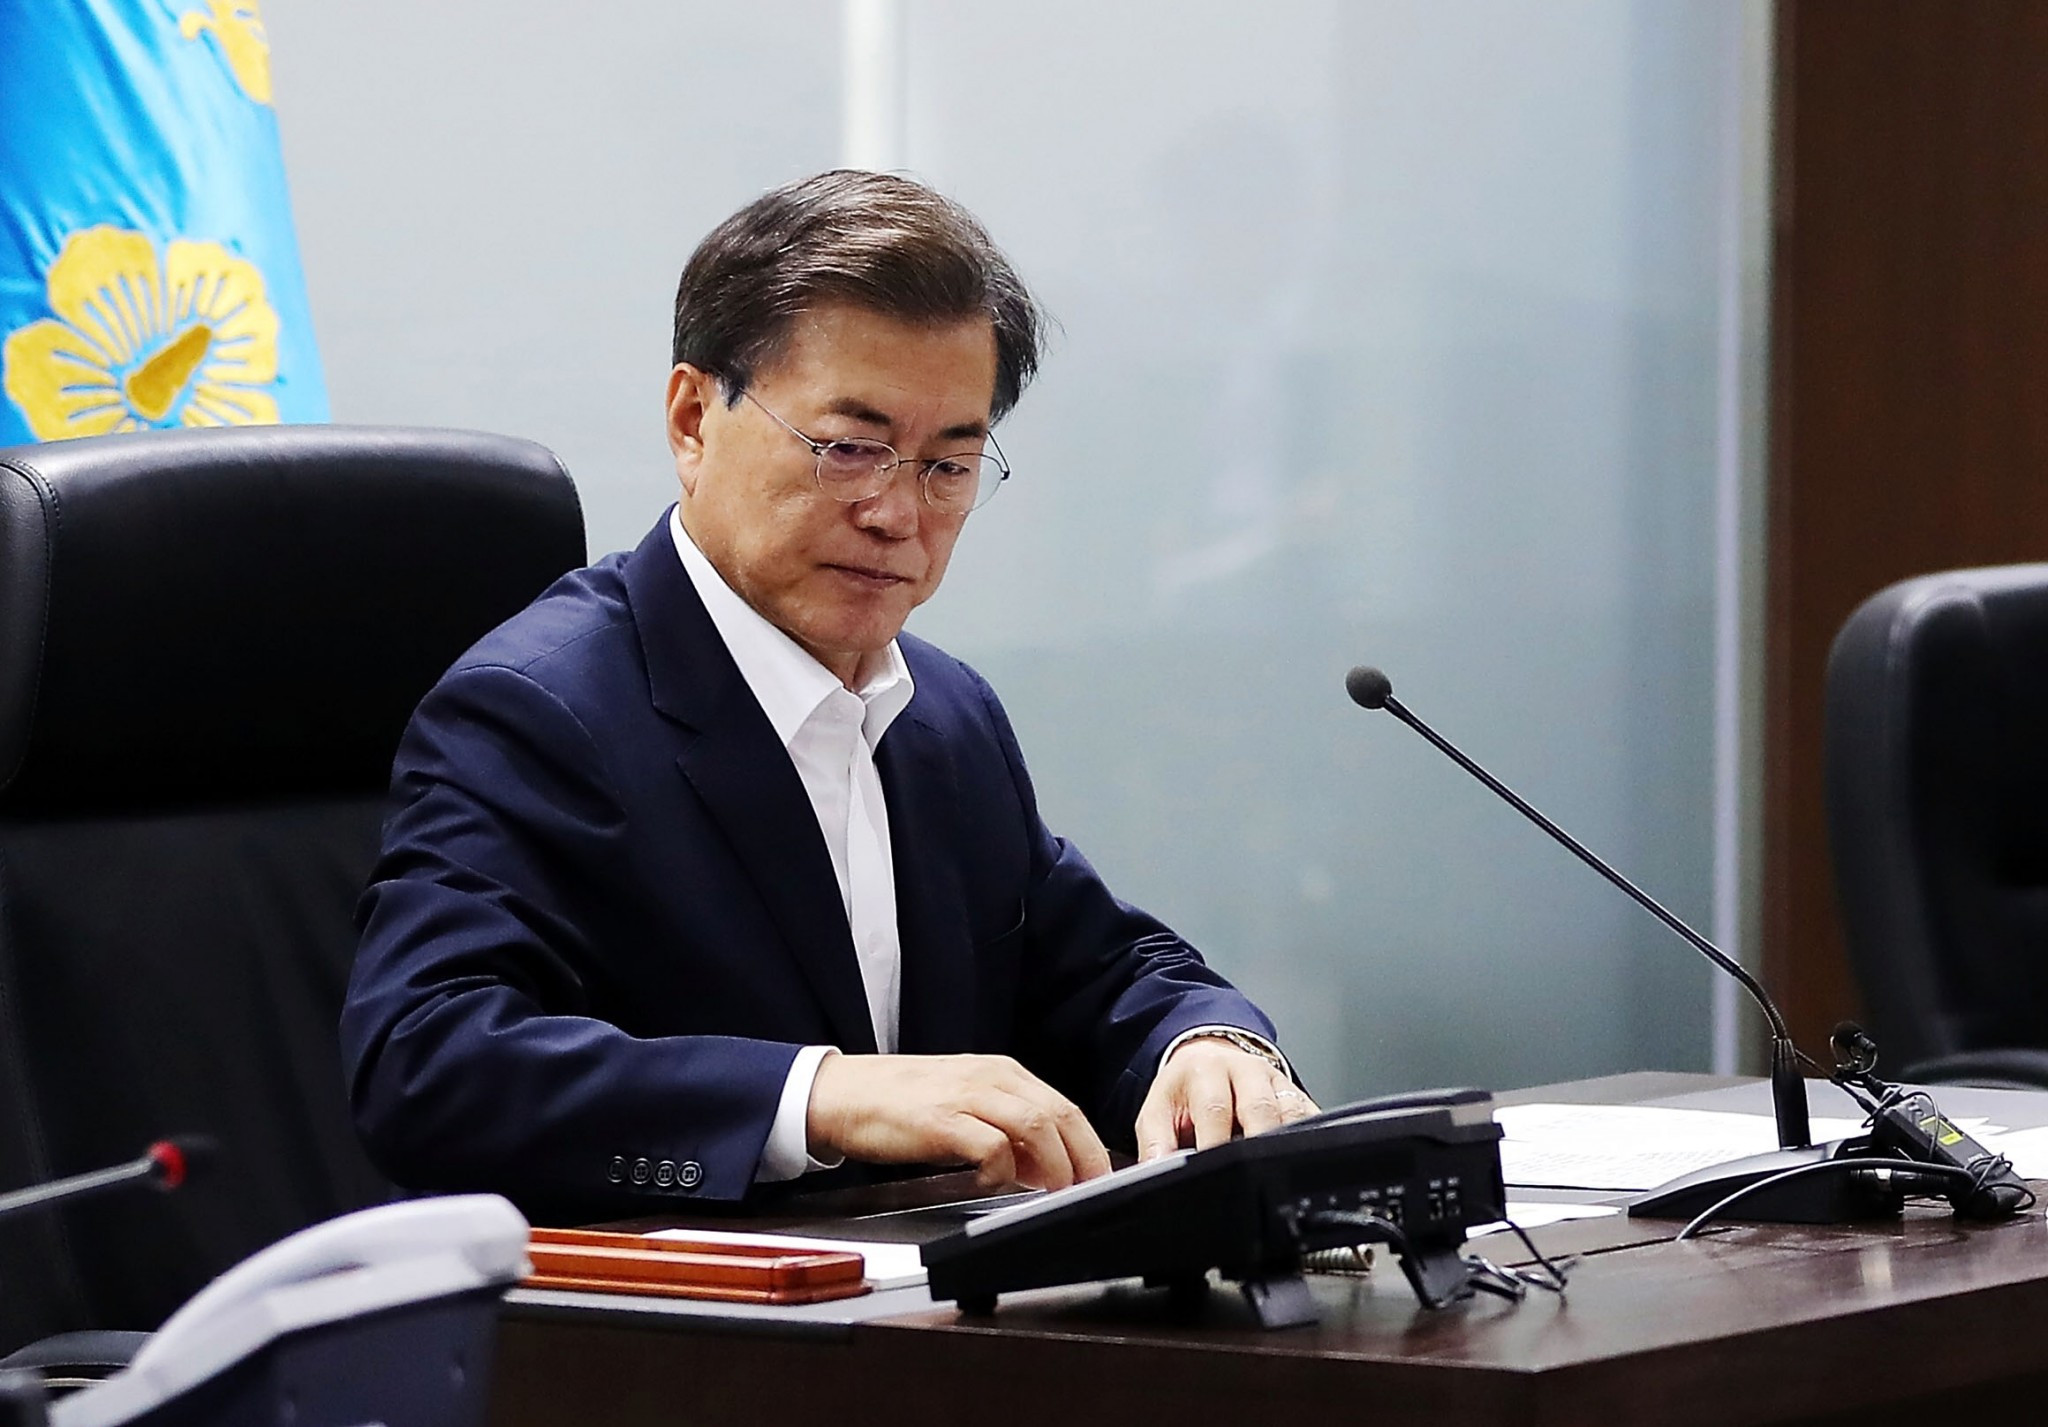 South Korean President Moon Jae-in has repeatedly expressed his hope that North Korea would be involved in next year's Winter Olympics in Pyeongchang ©Getty Images